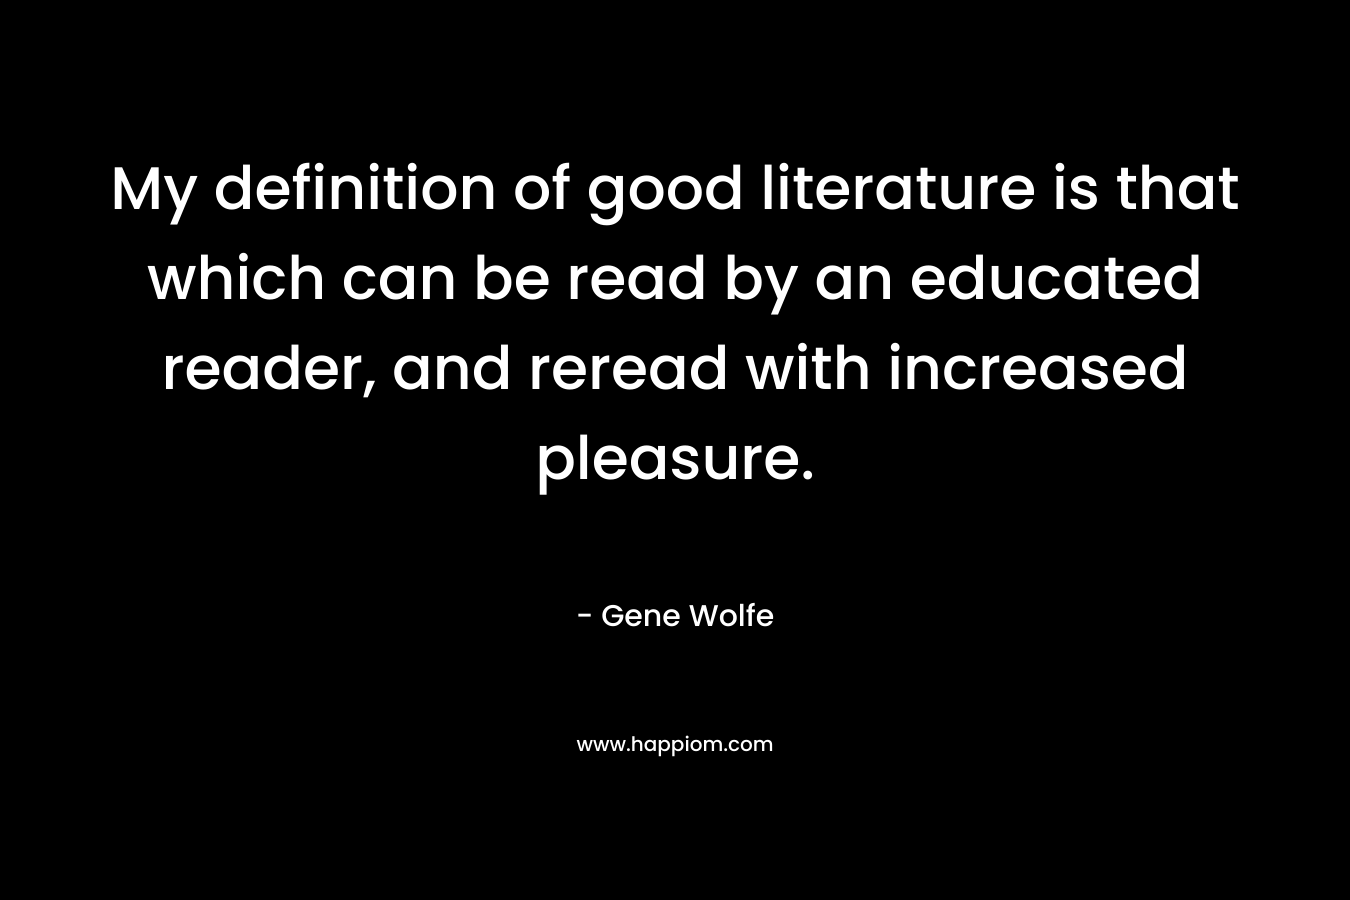 My definition of good literature is that which can be read by an educated reader, and reread with increased pleasure. – Gene Wolfe